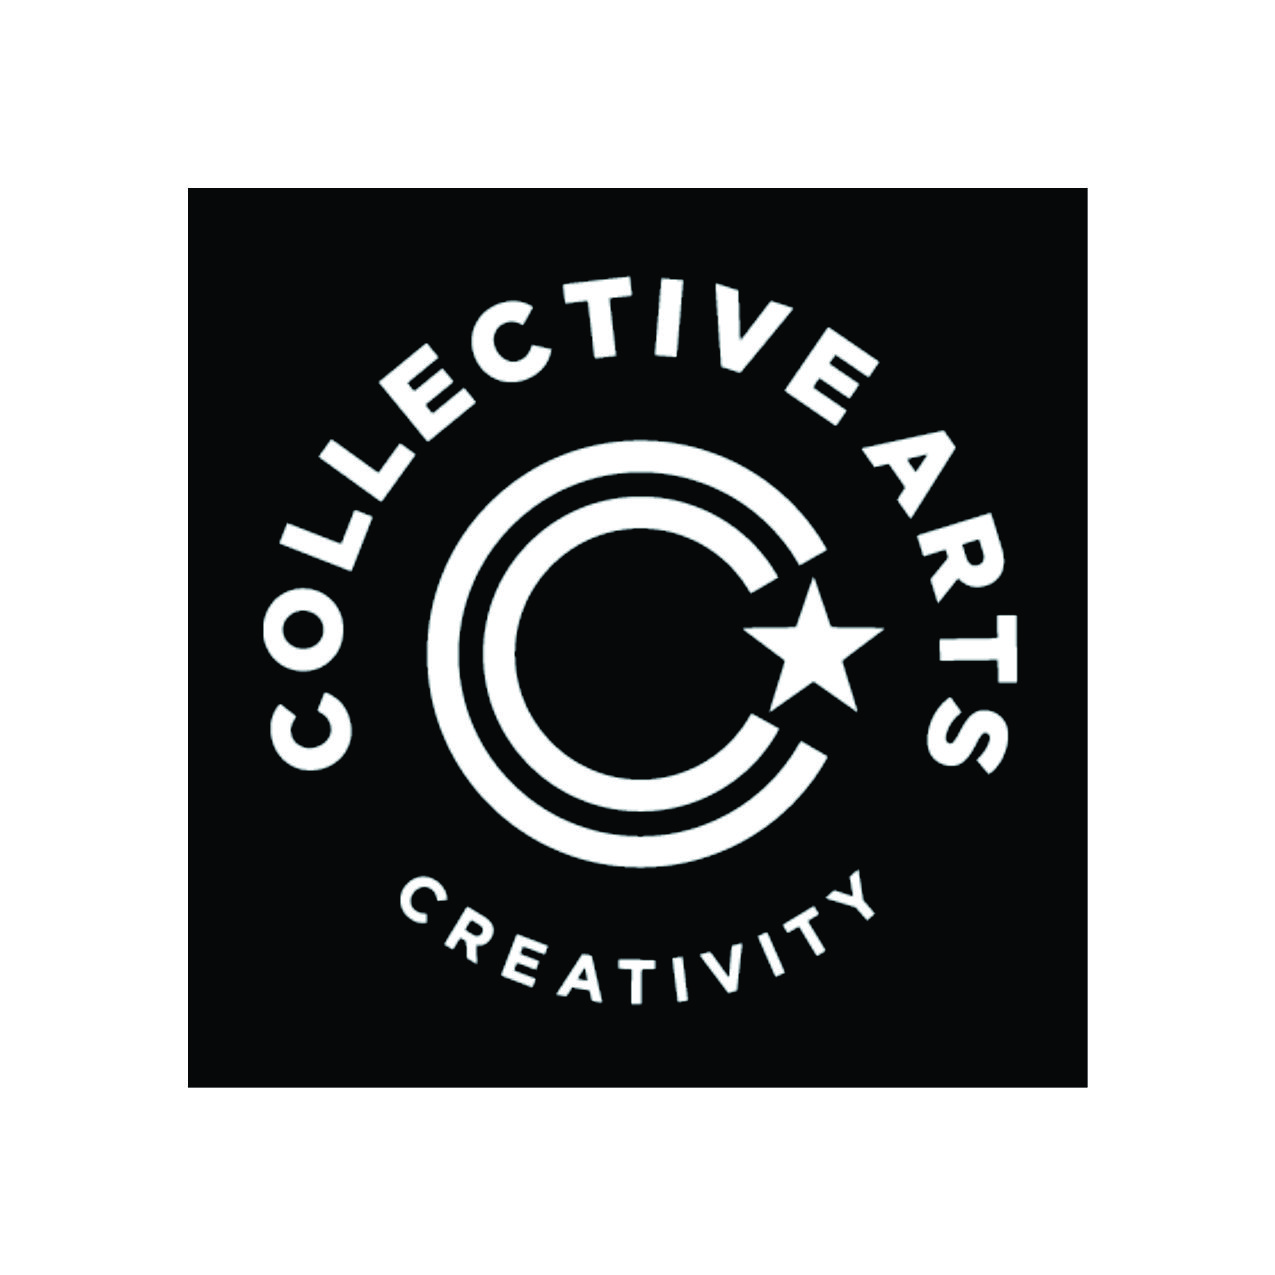 Collective Arts